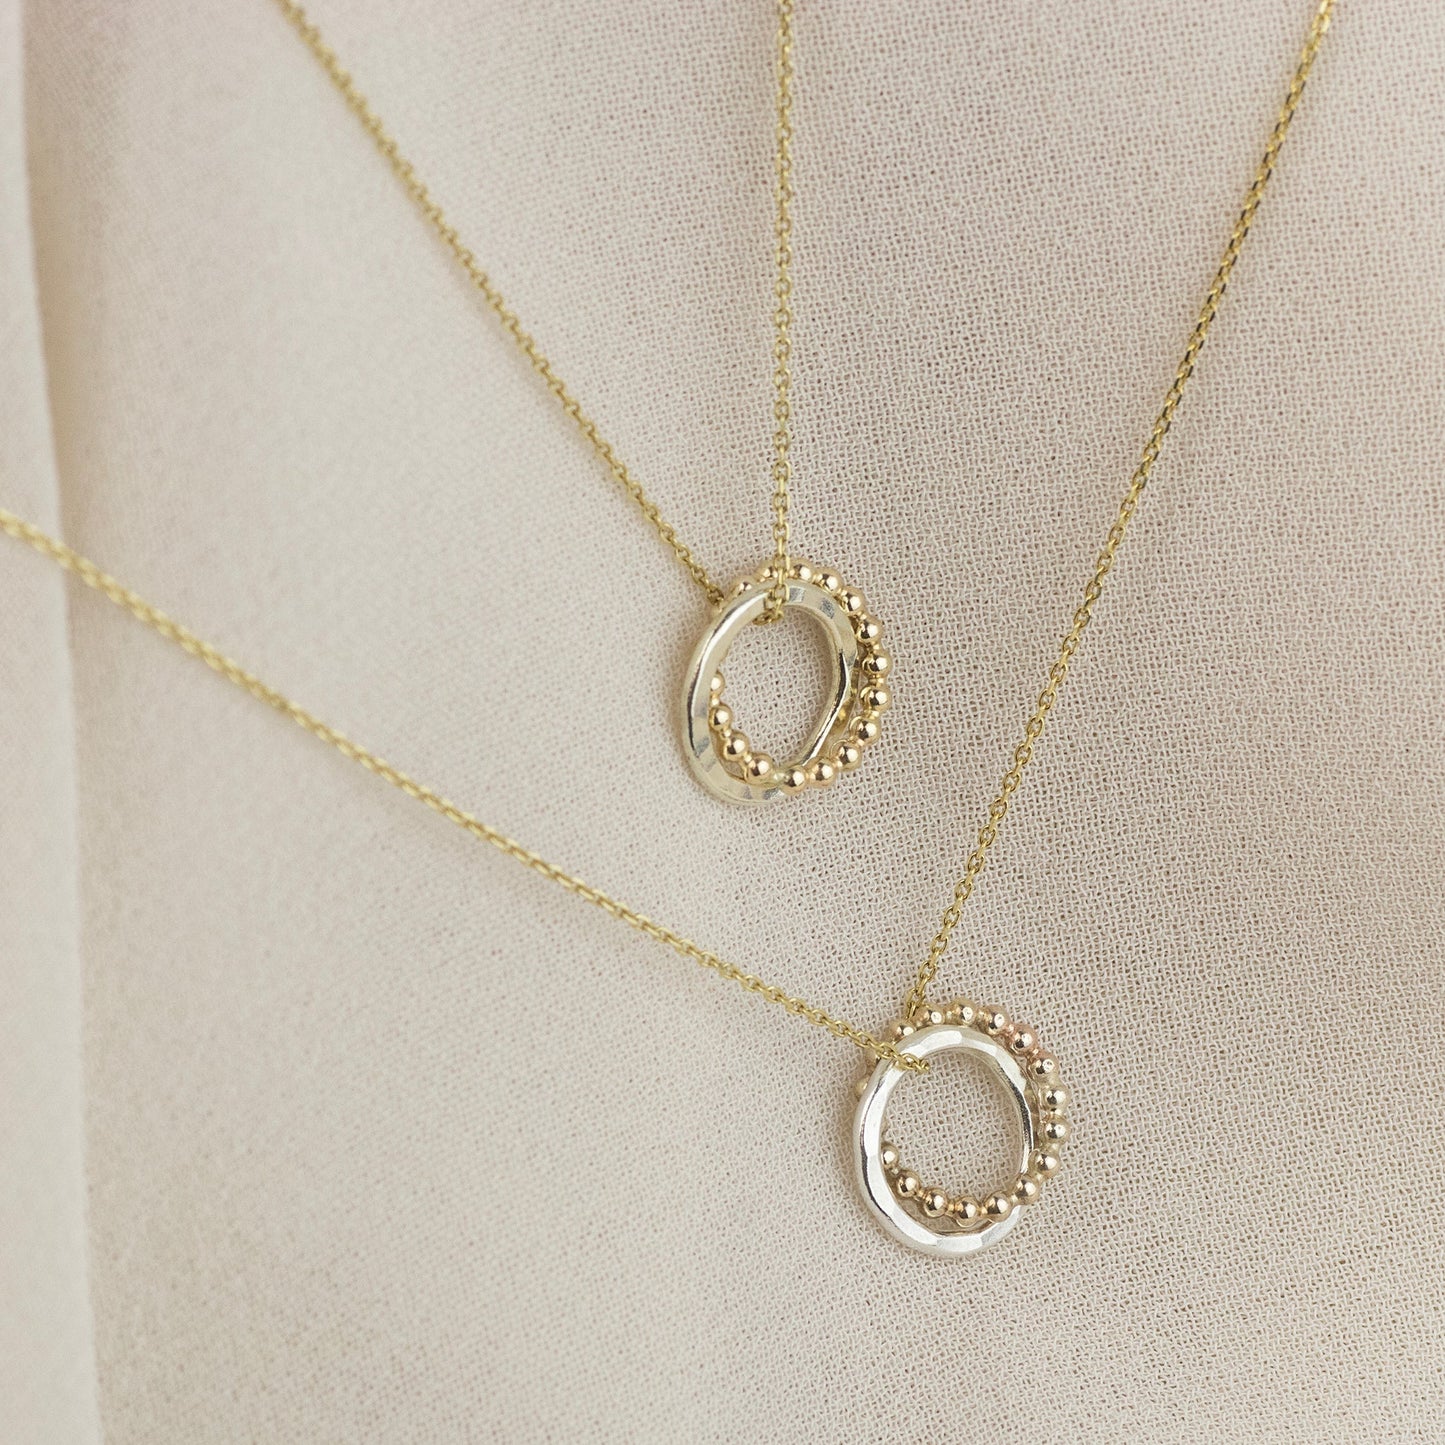 Bride & Bridesmaid Necklaces Matching Set - 9kt Gold & Silver Love Knot Necklaces